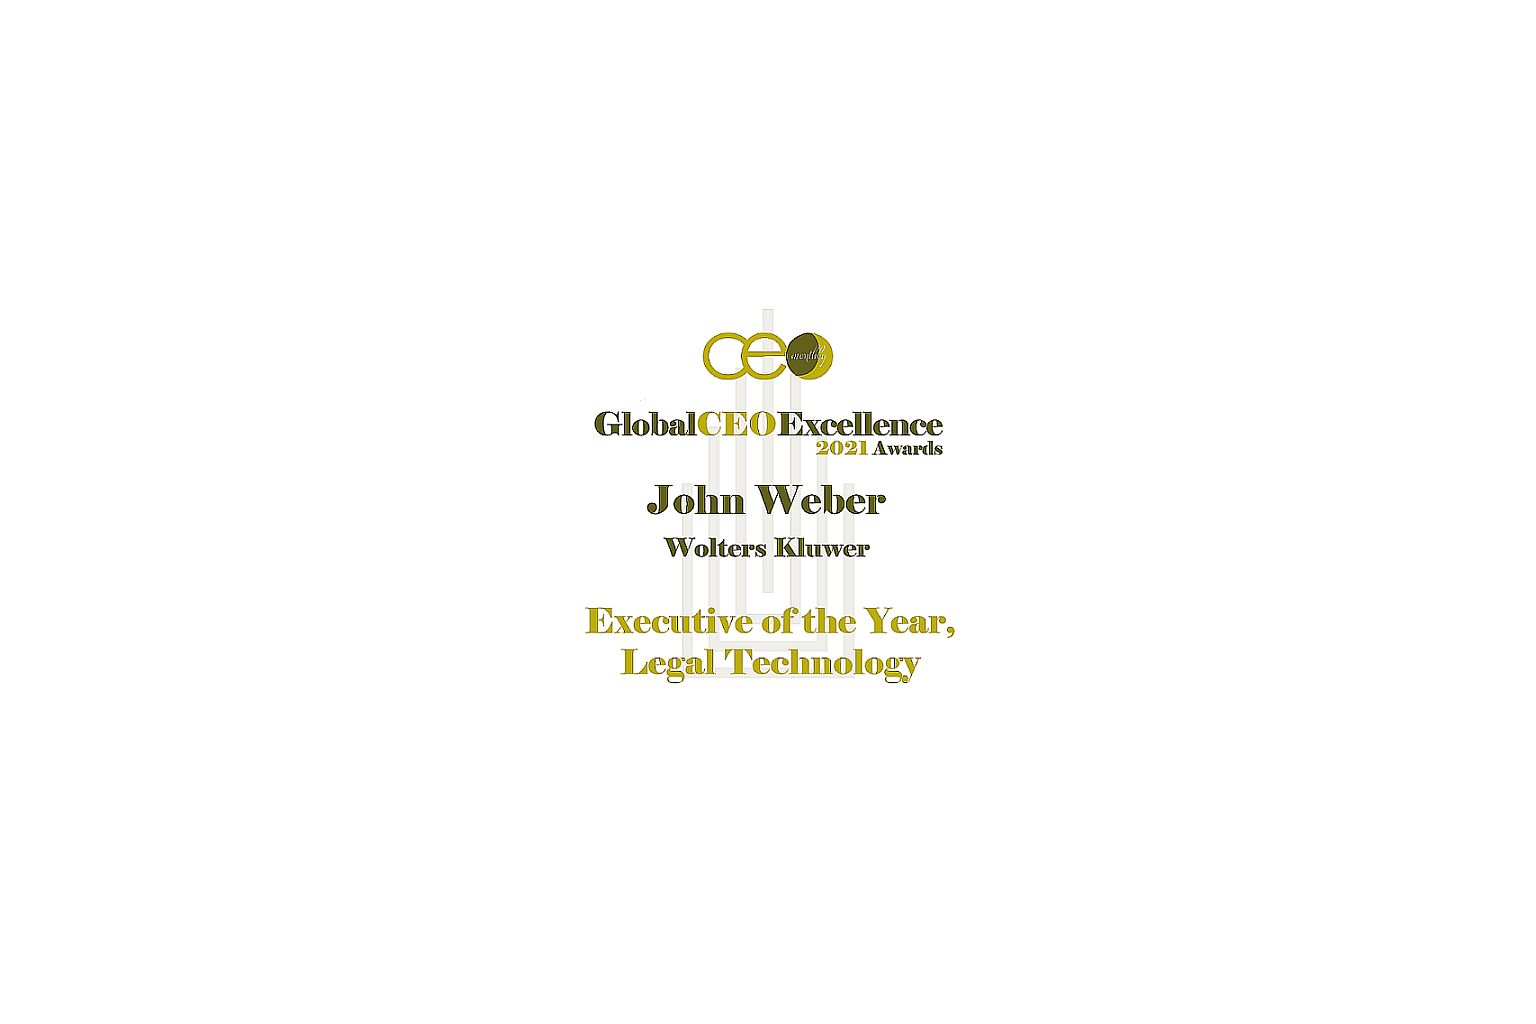 John Weber named Executive of the Year, Legal Technology